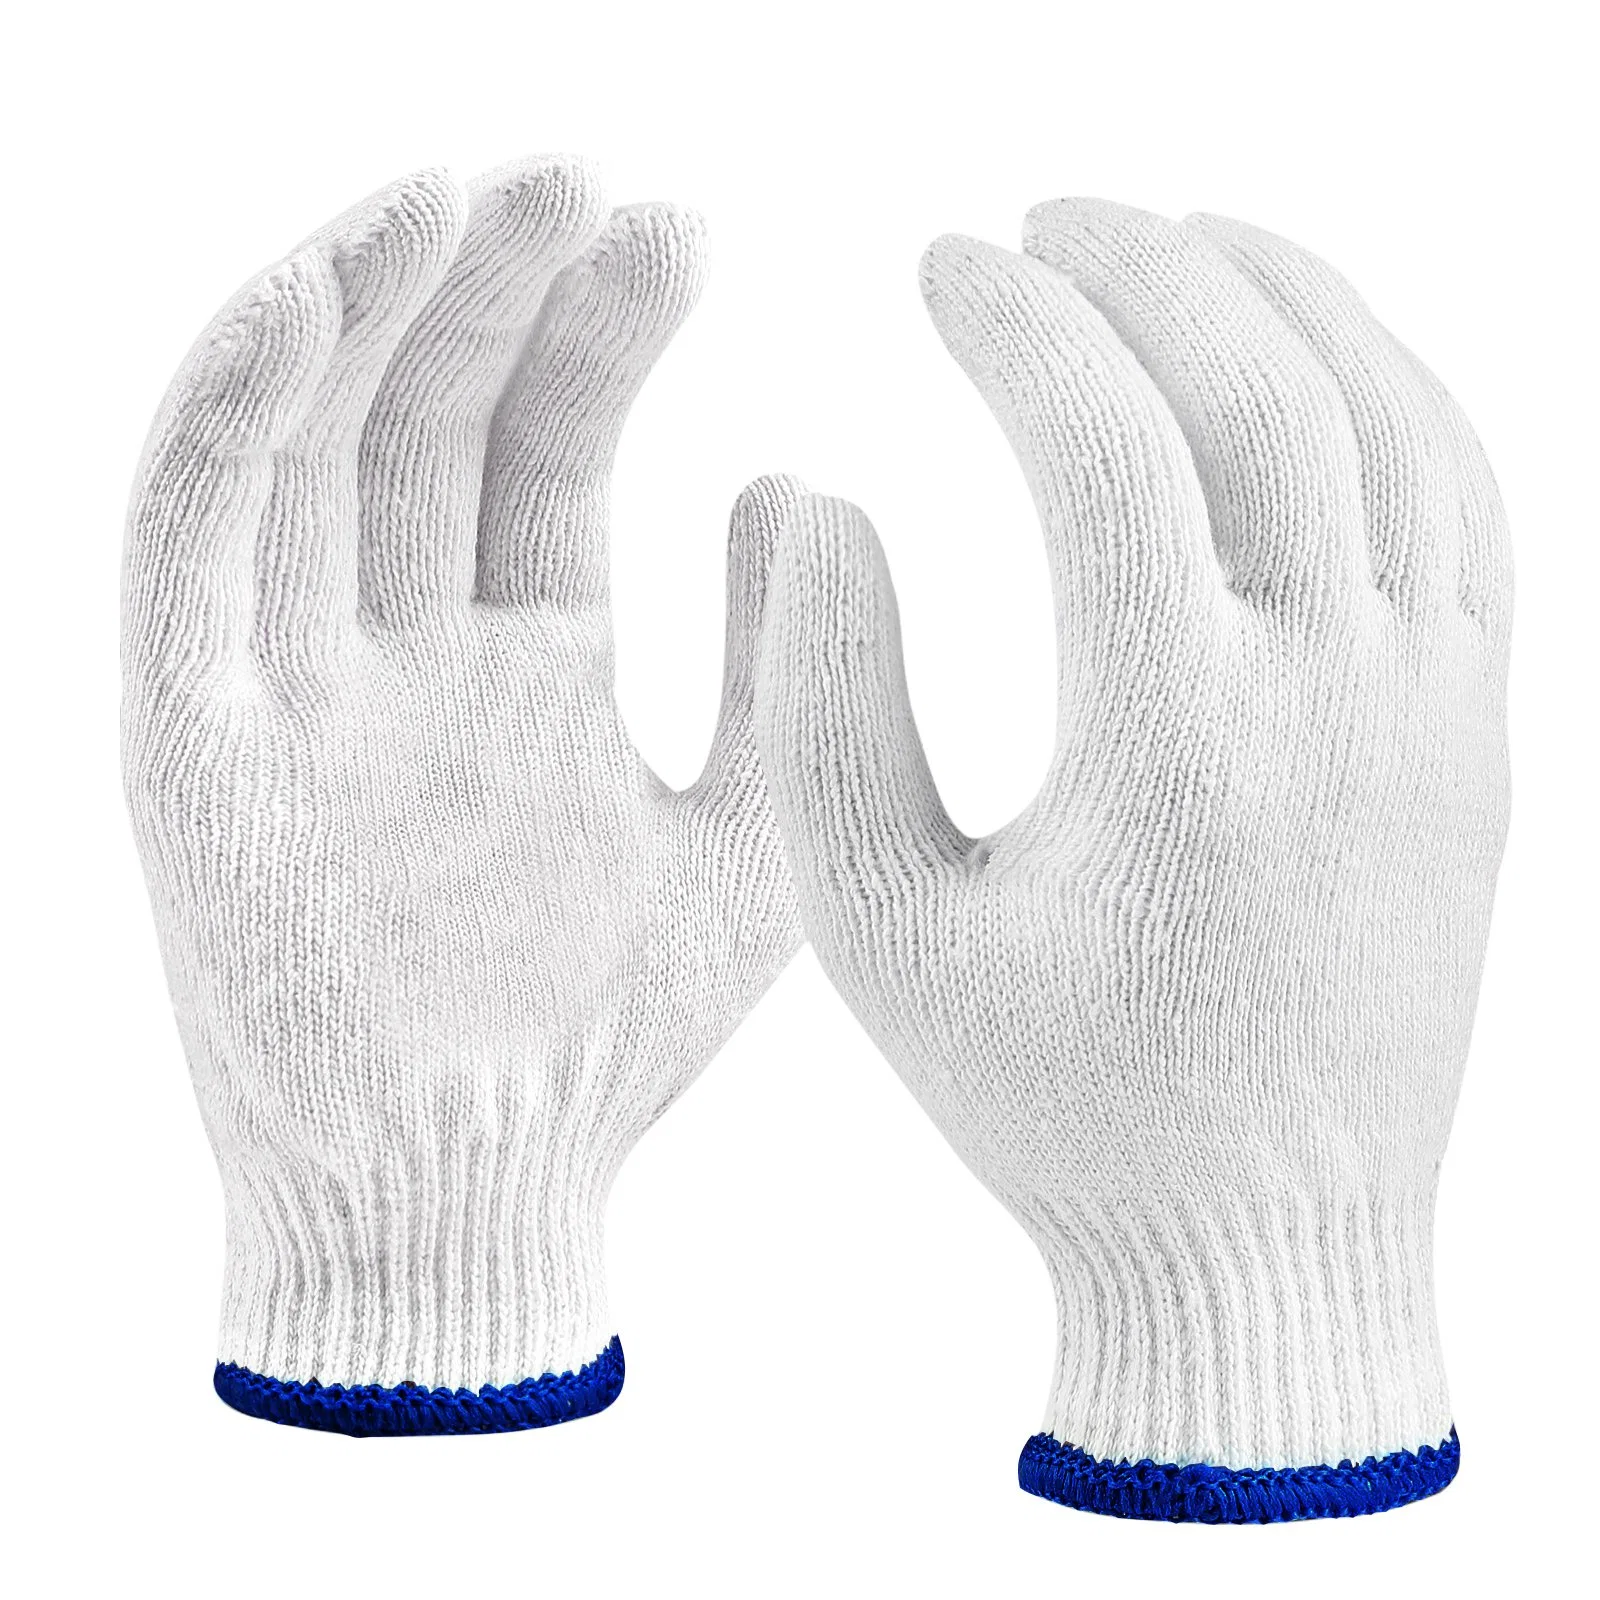 China Wholesale/Supplier 7/10gauge White Mittens Safety/Work Glove Working Guantes Cotton Knitted Gloves